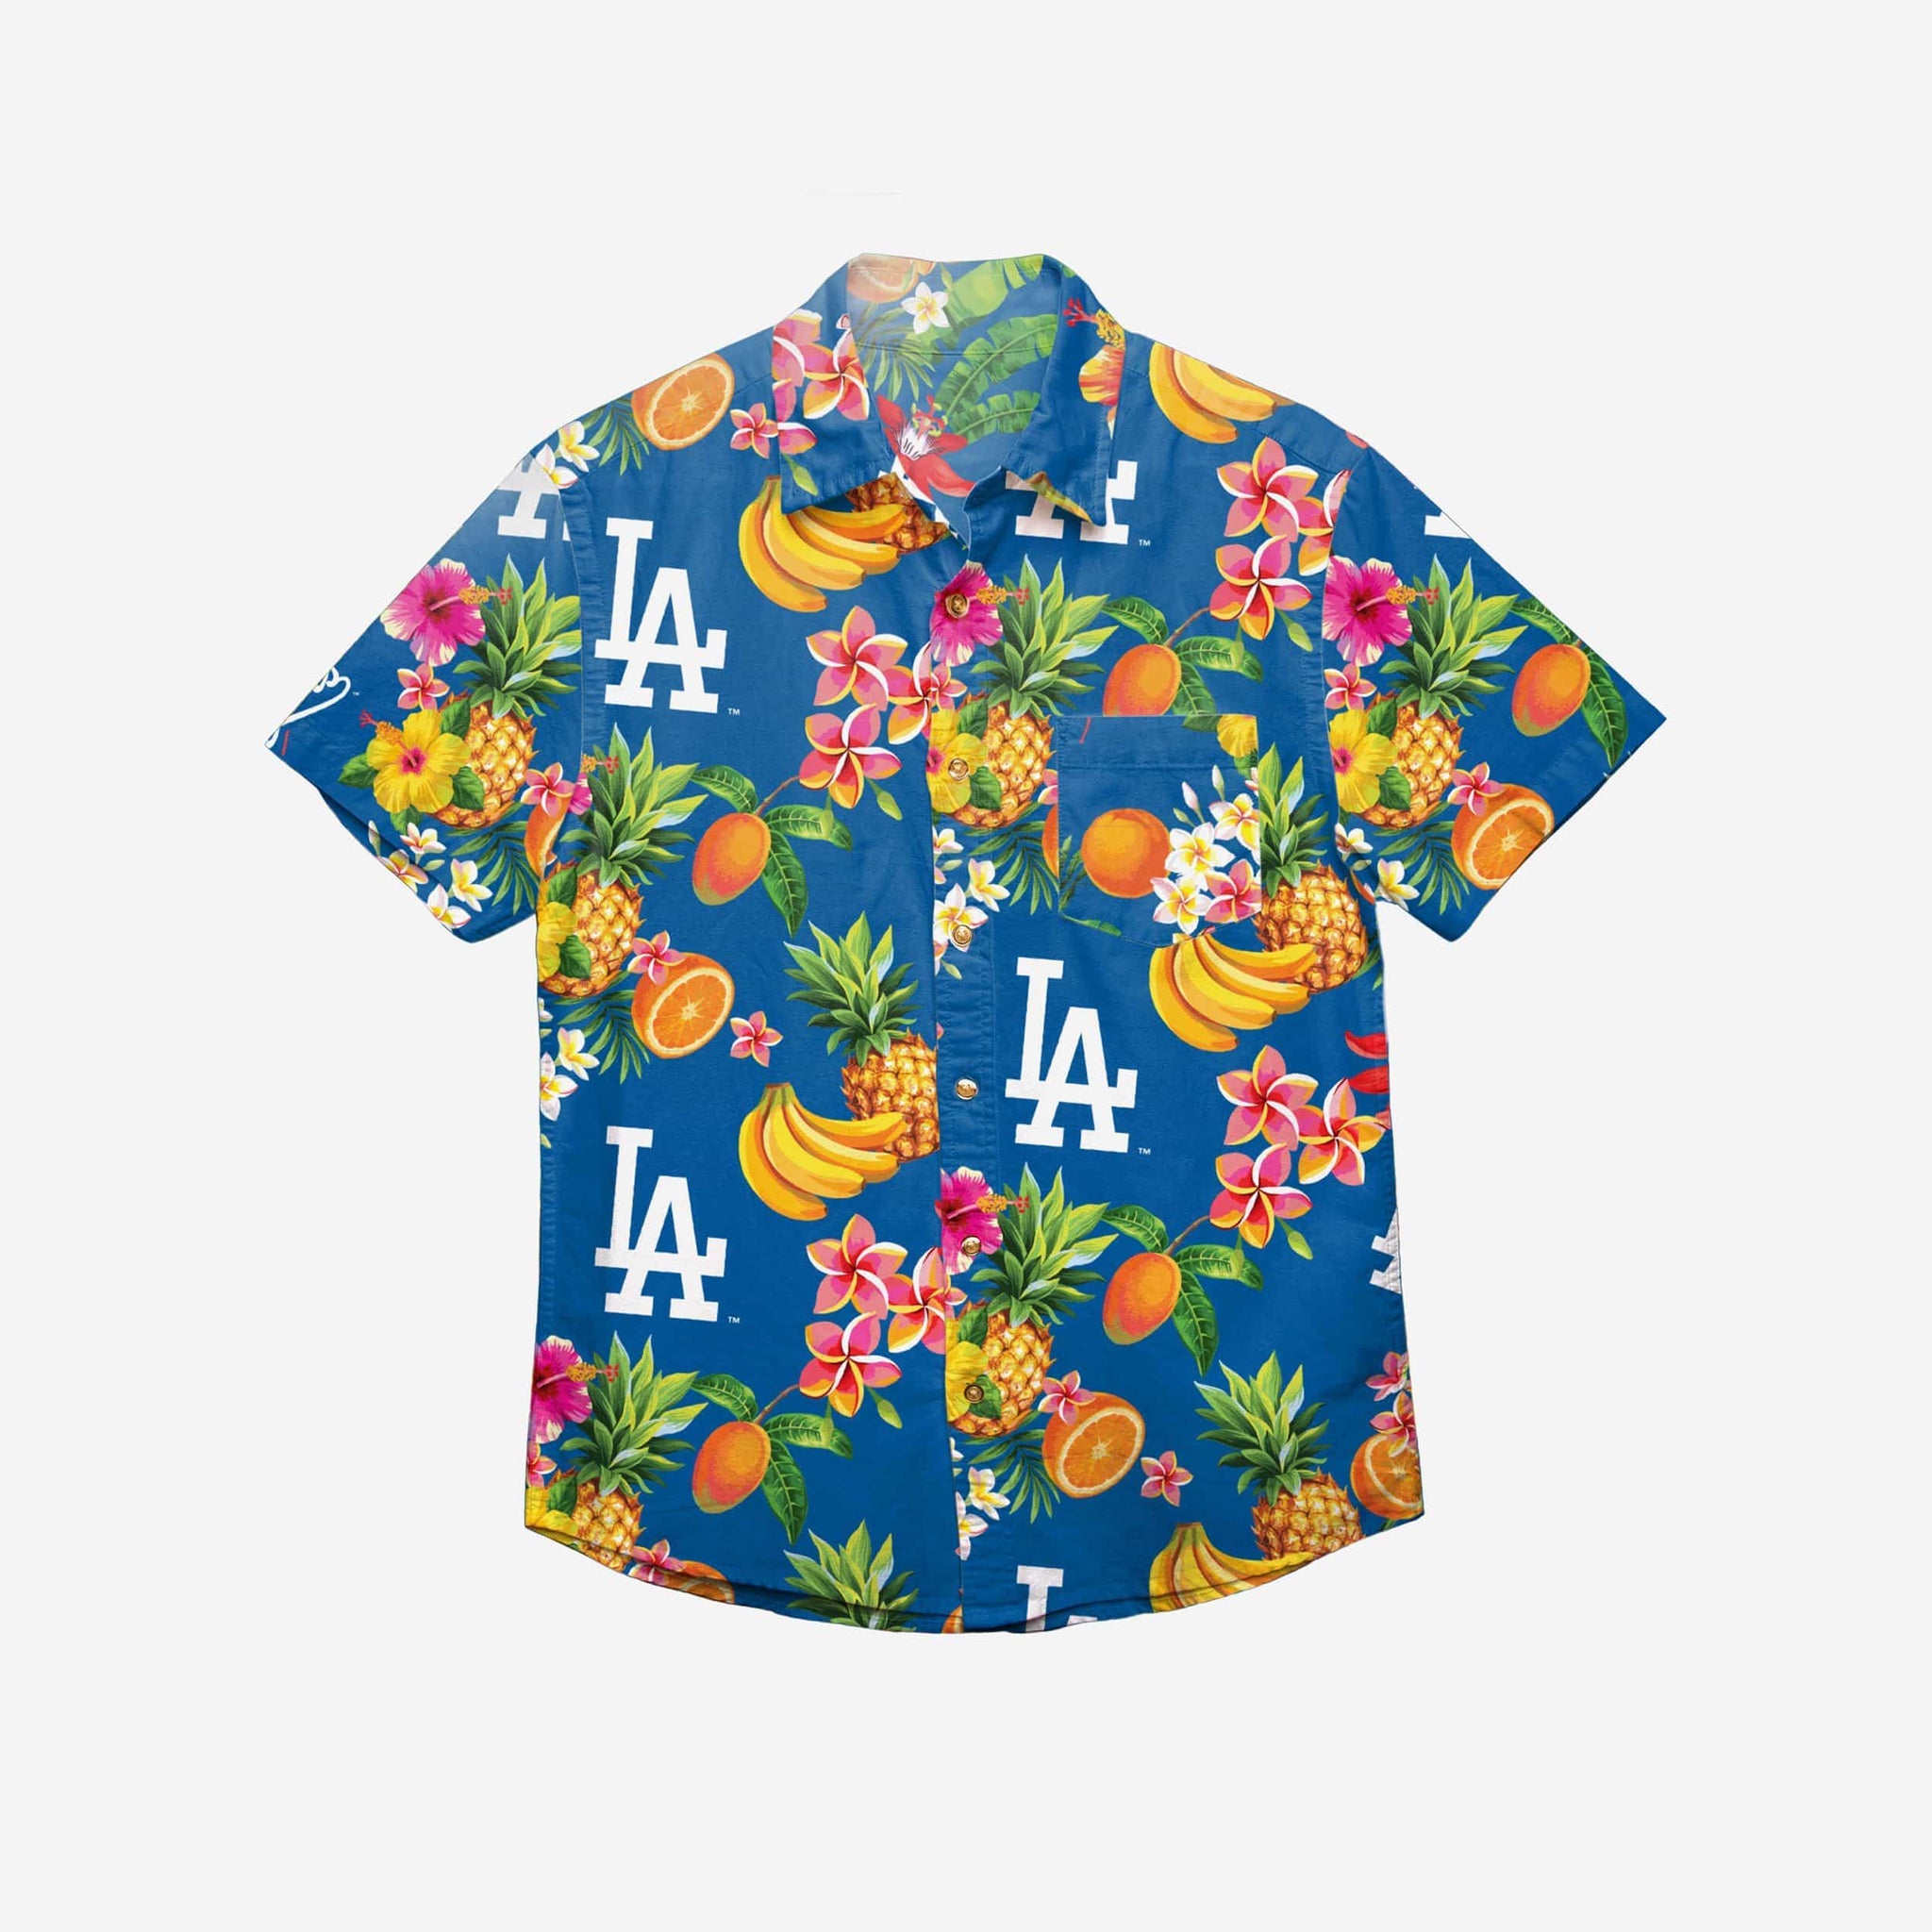 FOCO Los Angeles Dodgers MLB Mens Floral Button Up Shirt